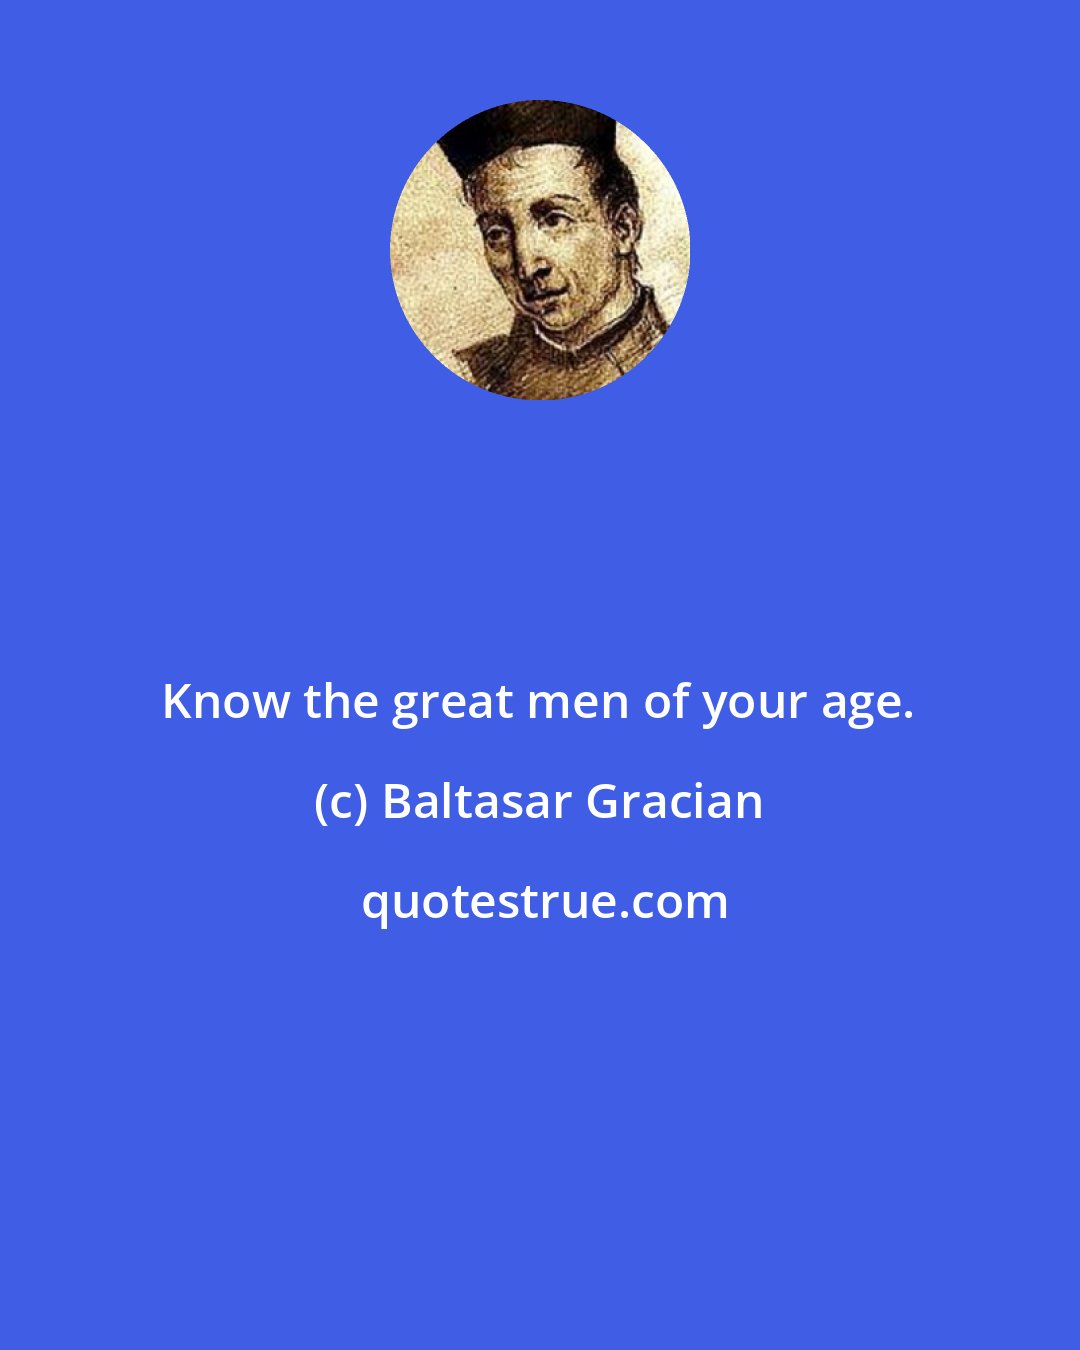 Baltasar Gracian: Know the great men of your age.